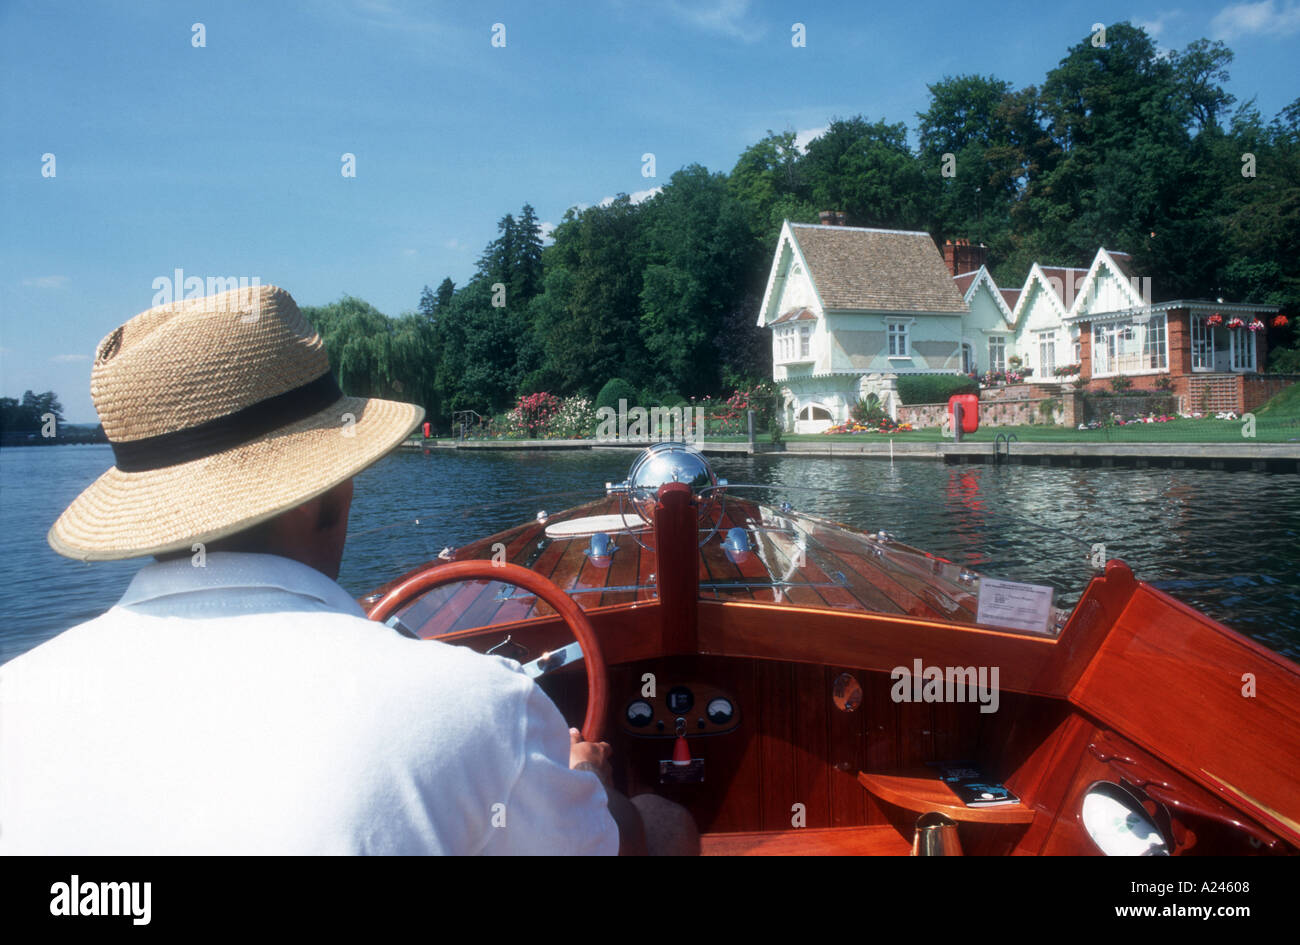 A young man in an electric powered slipper launch River Thames Henley on Thames Oxfordshire England UK  Stock Photo